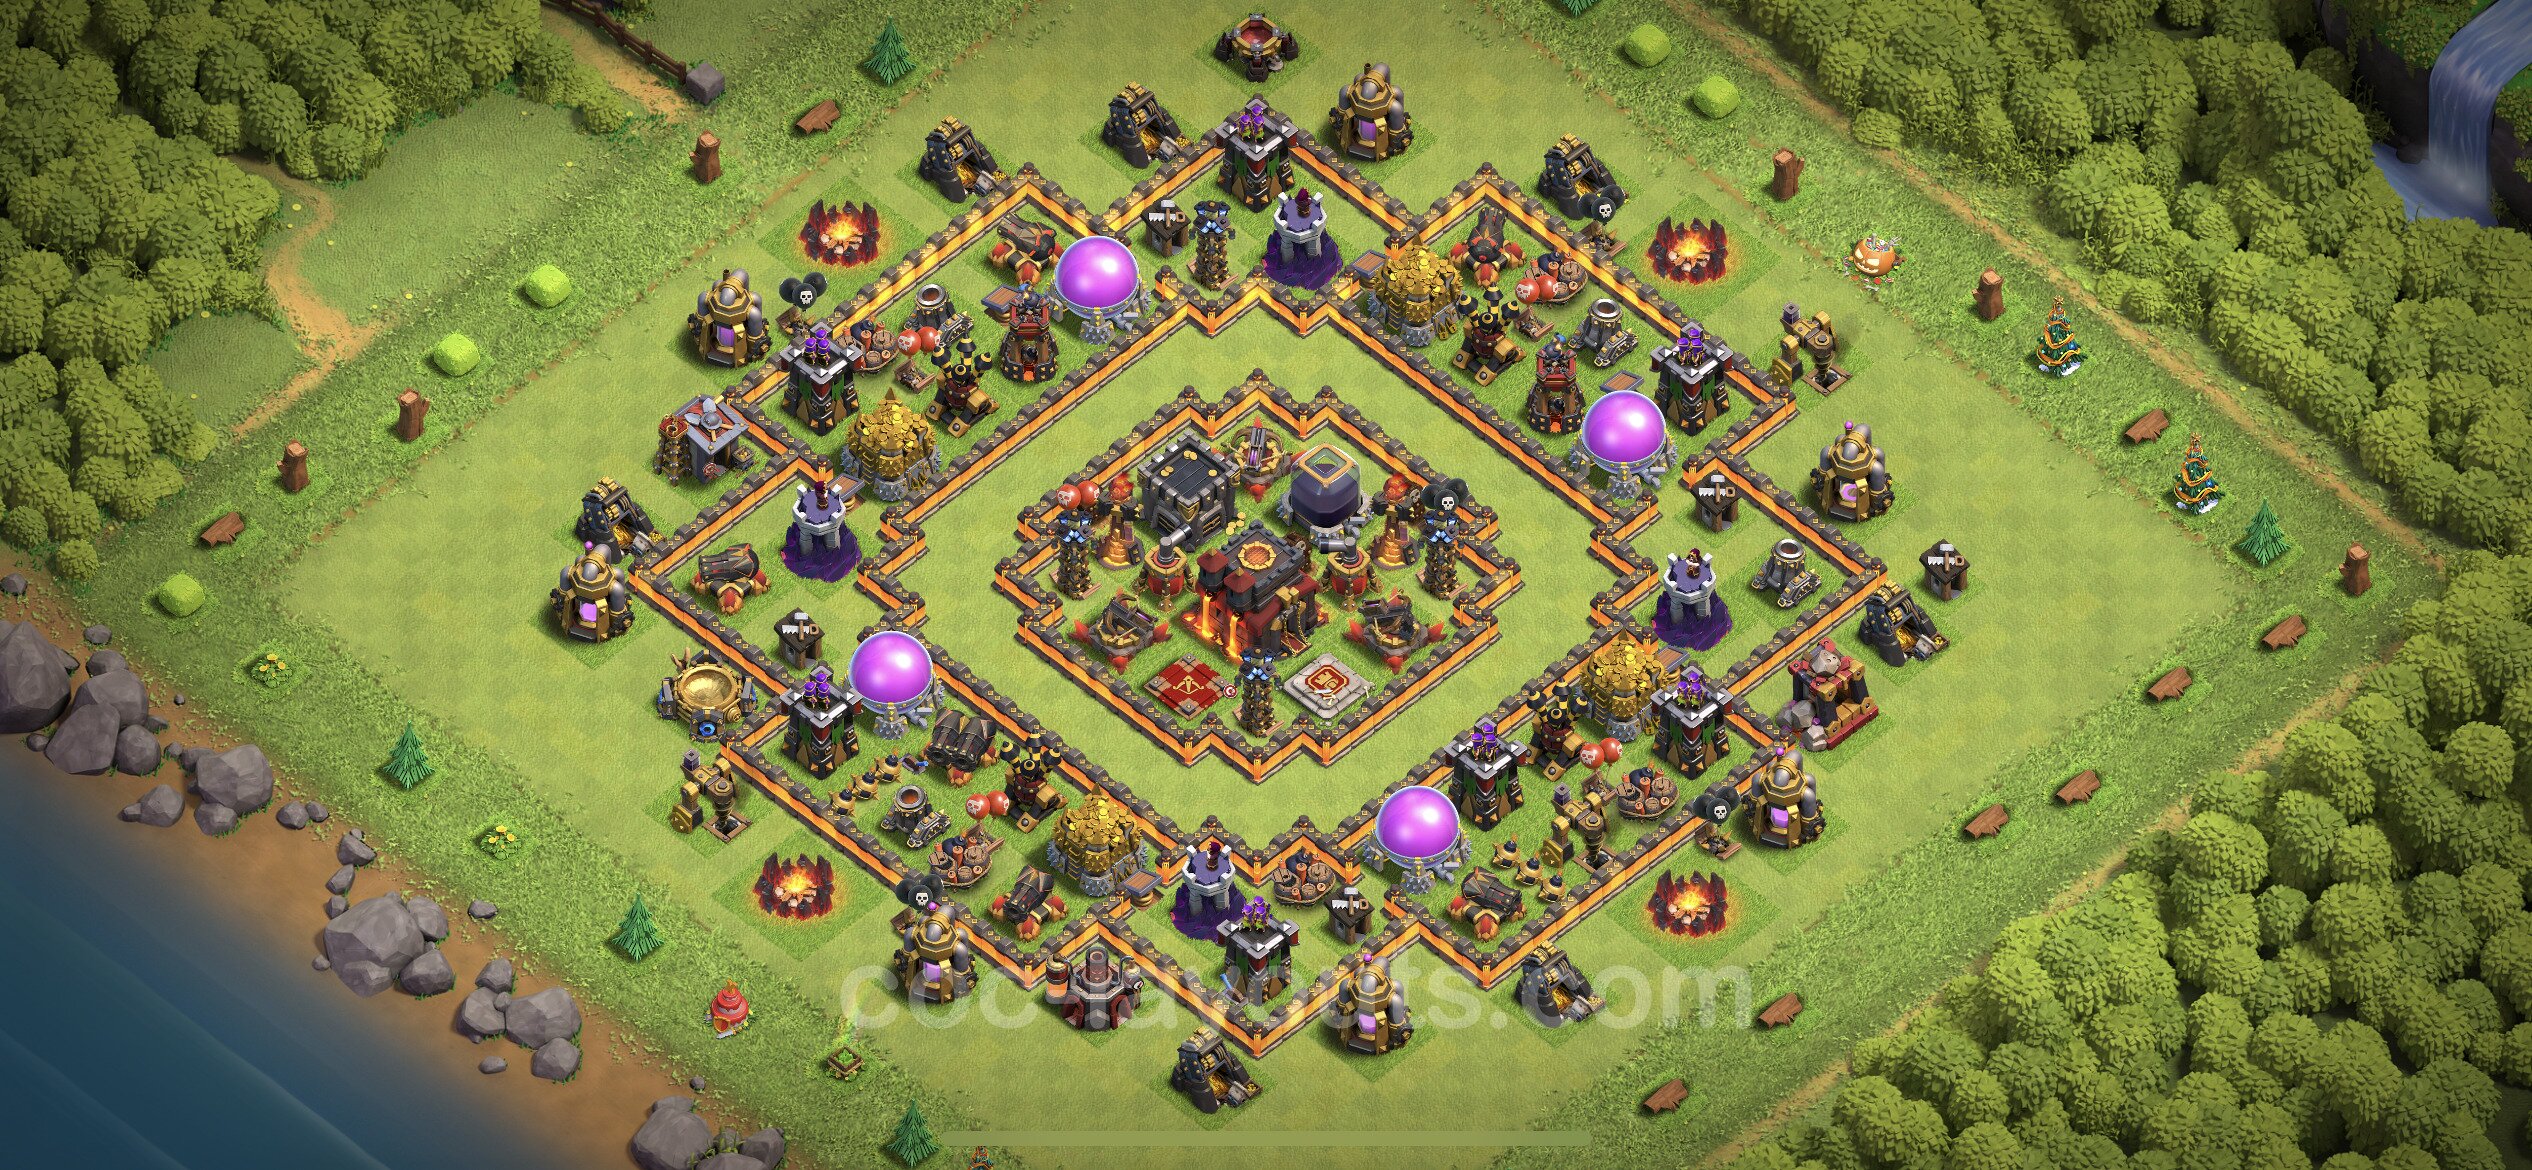 landing Frustration Rather Best Base TH10 with Link, Hybrid Anti GoWiWi / GoWiPe - Town Hall Level 10  Base Copy - (#74)